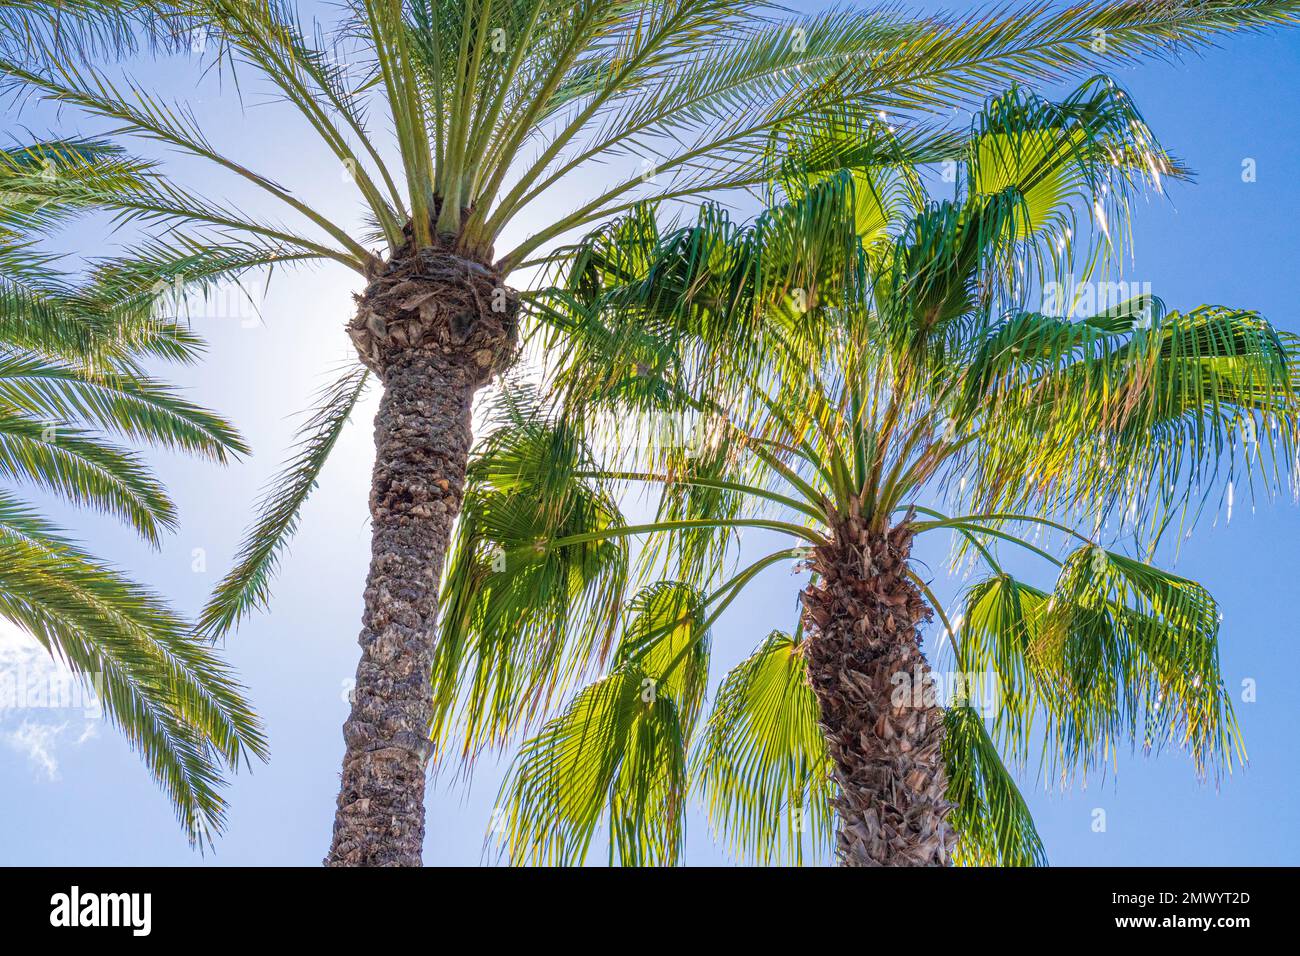 Palm trees backlit by the sun on the Canary Island of Fuerteventura, Spain Stock Photo